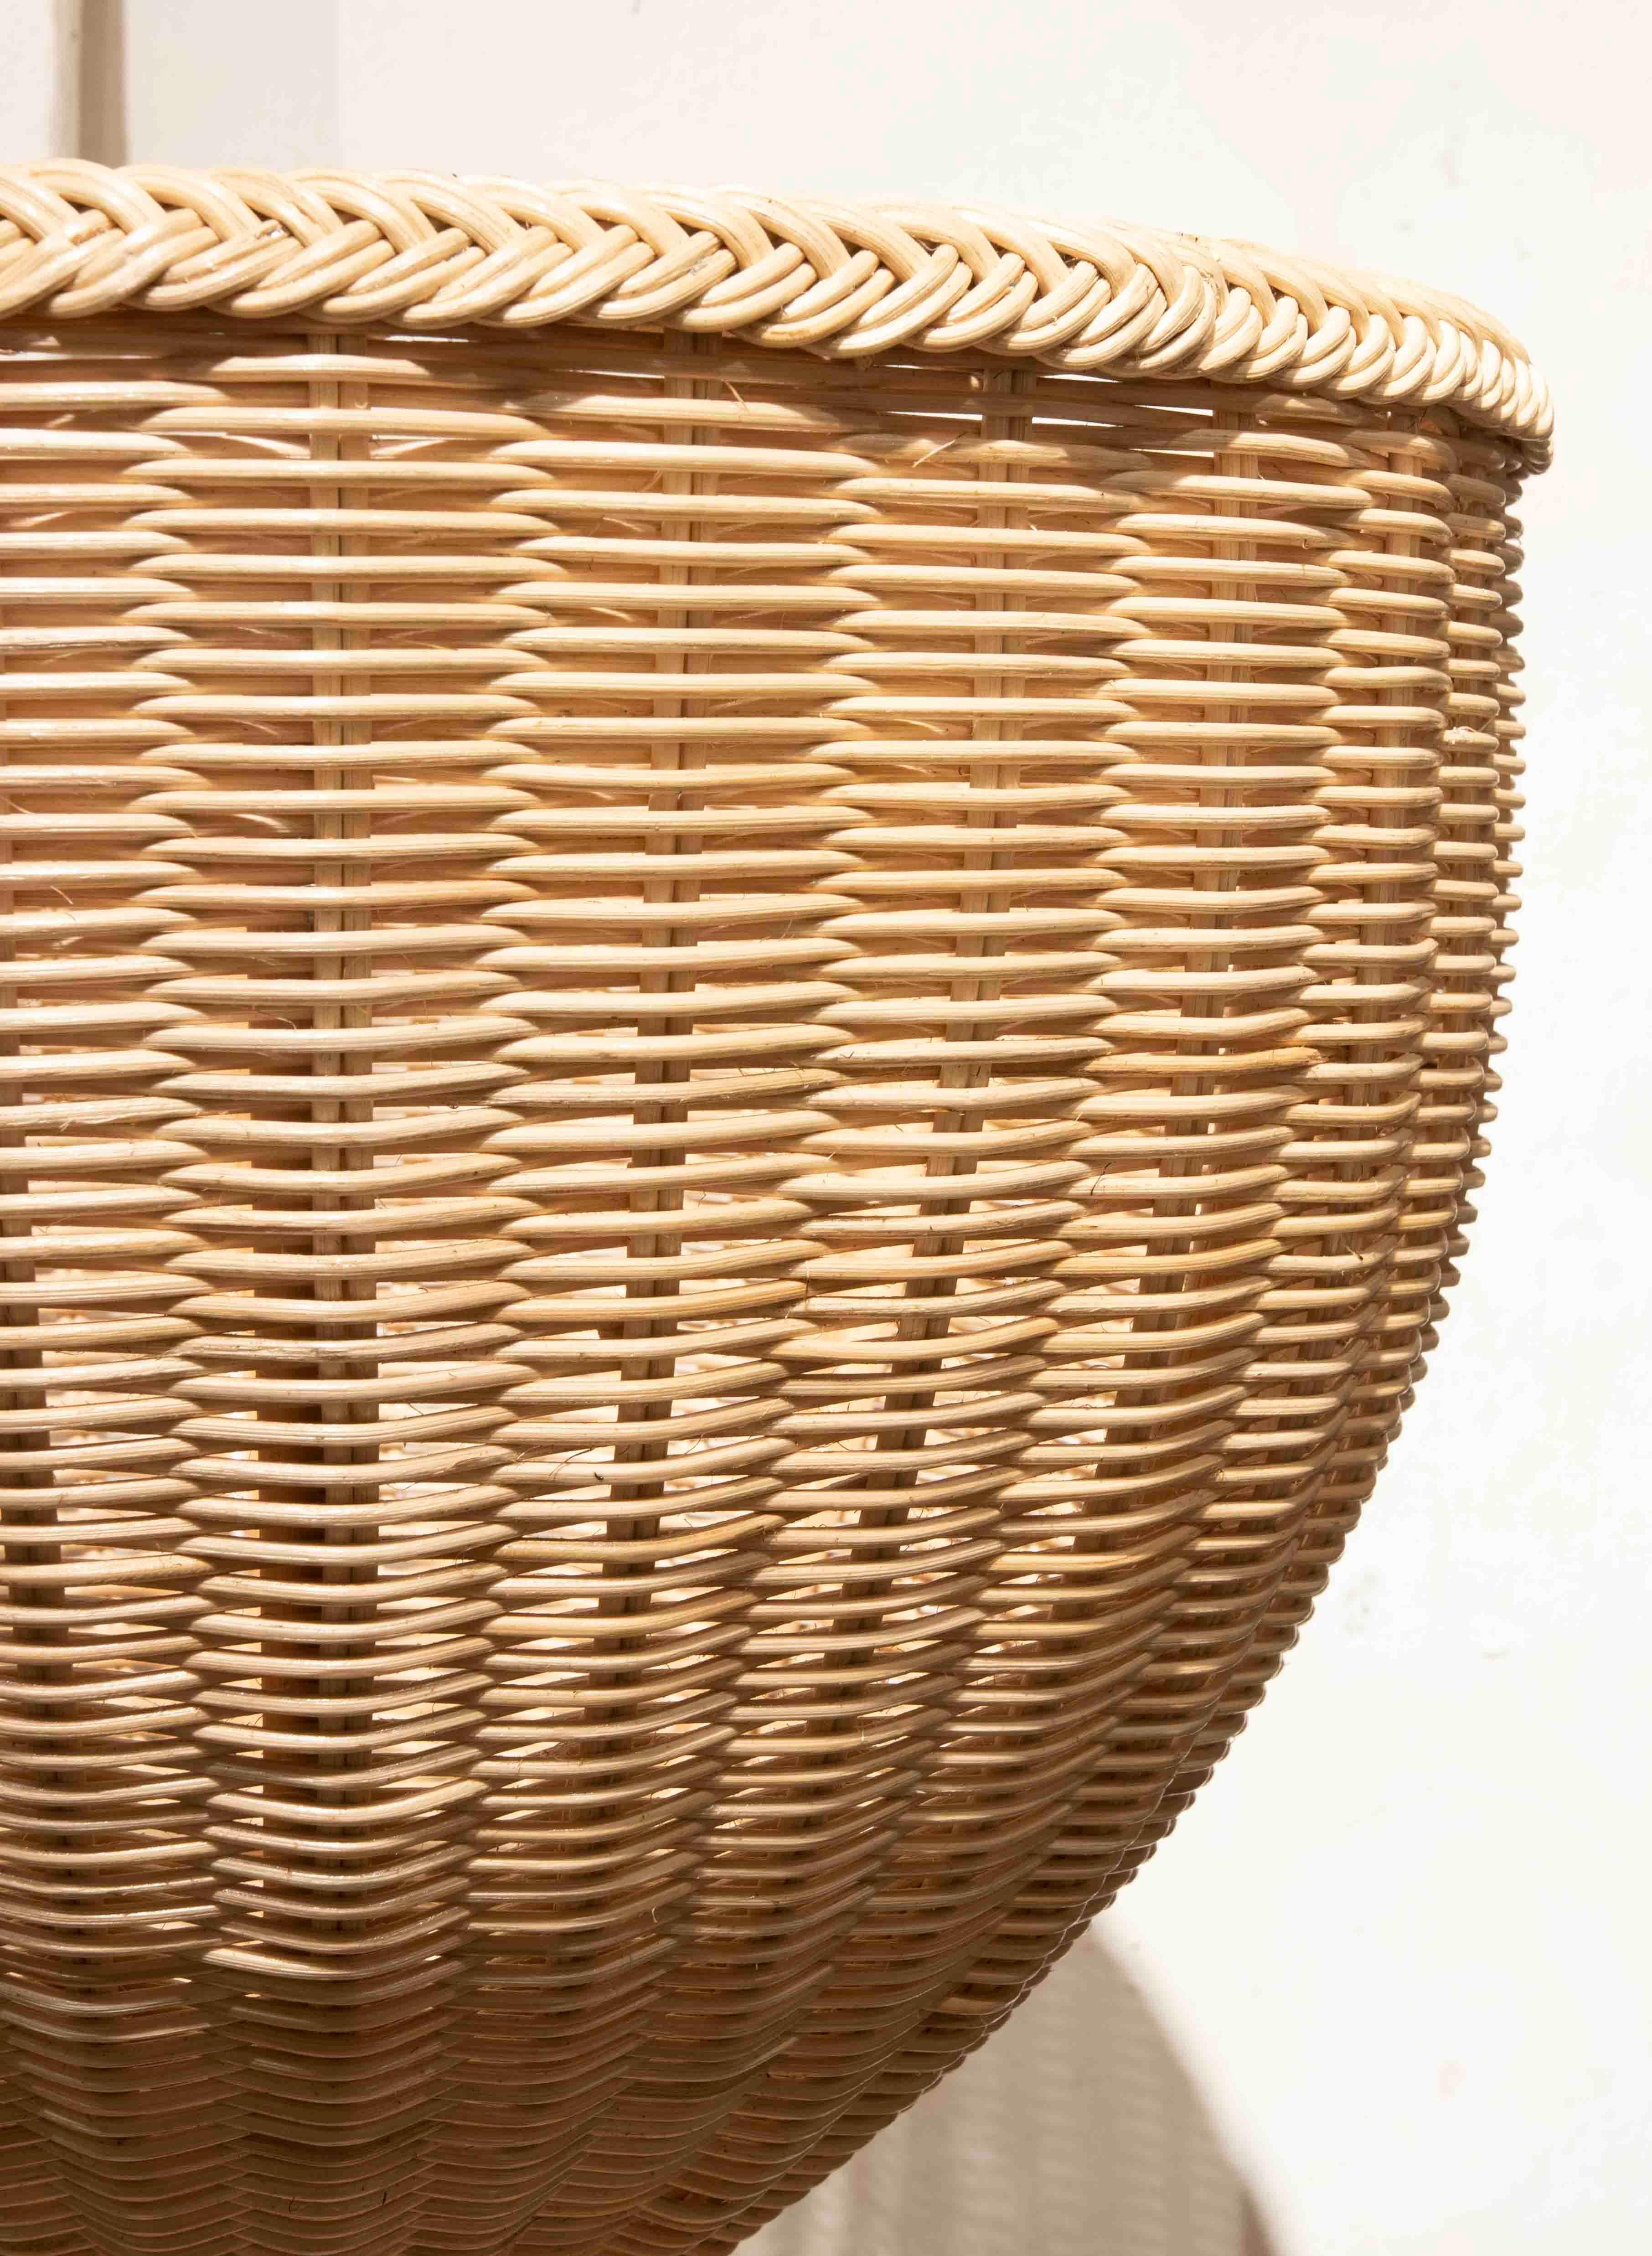 Pair of Handmade Wicker Cups with Rectangular Bases and wooden Structure For Sale 6